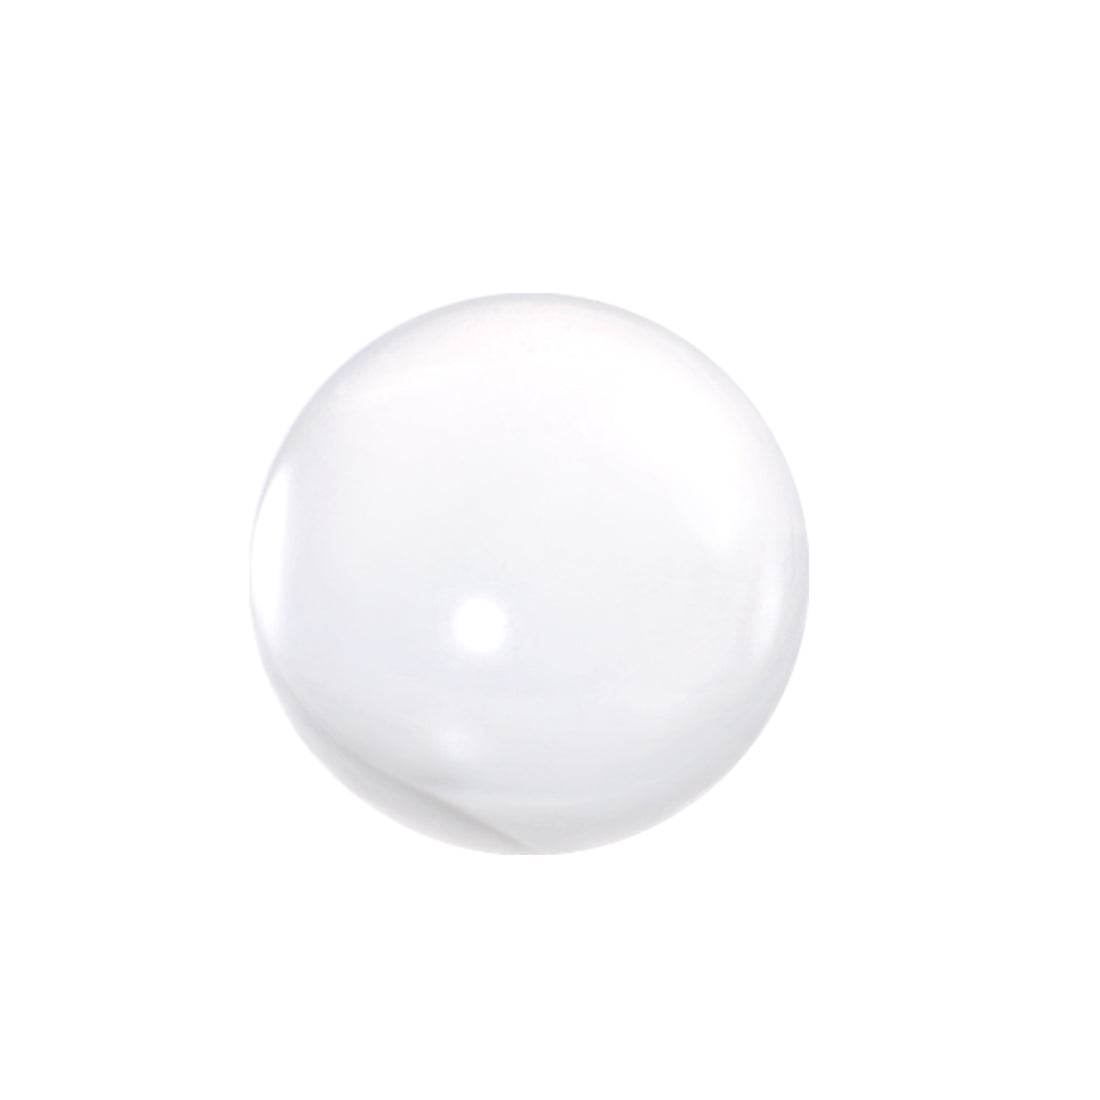 Uxcell Uxcell 10mm Diameter Acrylic Ball Clear/Transparent Sphere Ornament 0.4 Inches